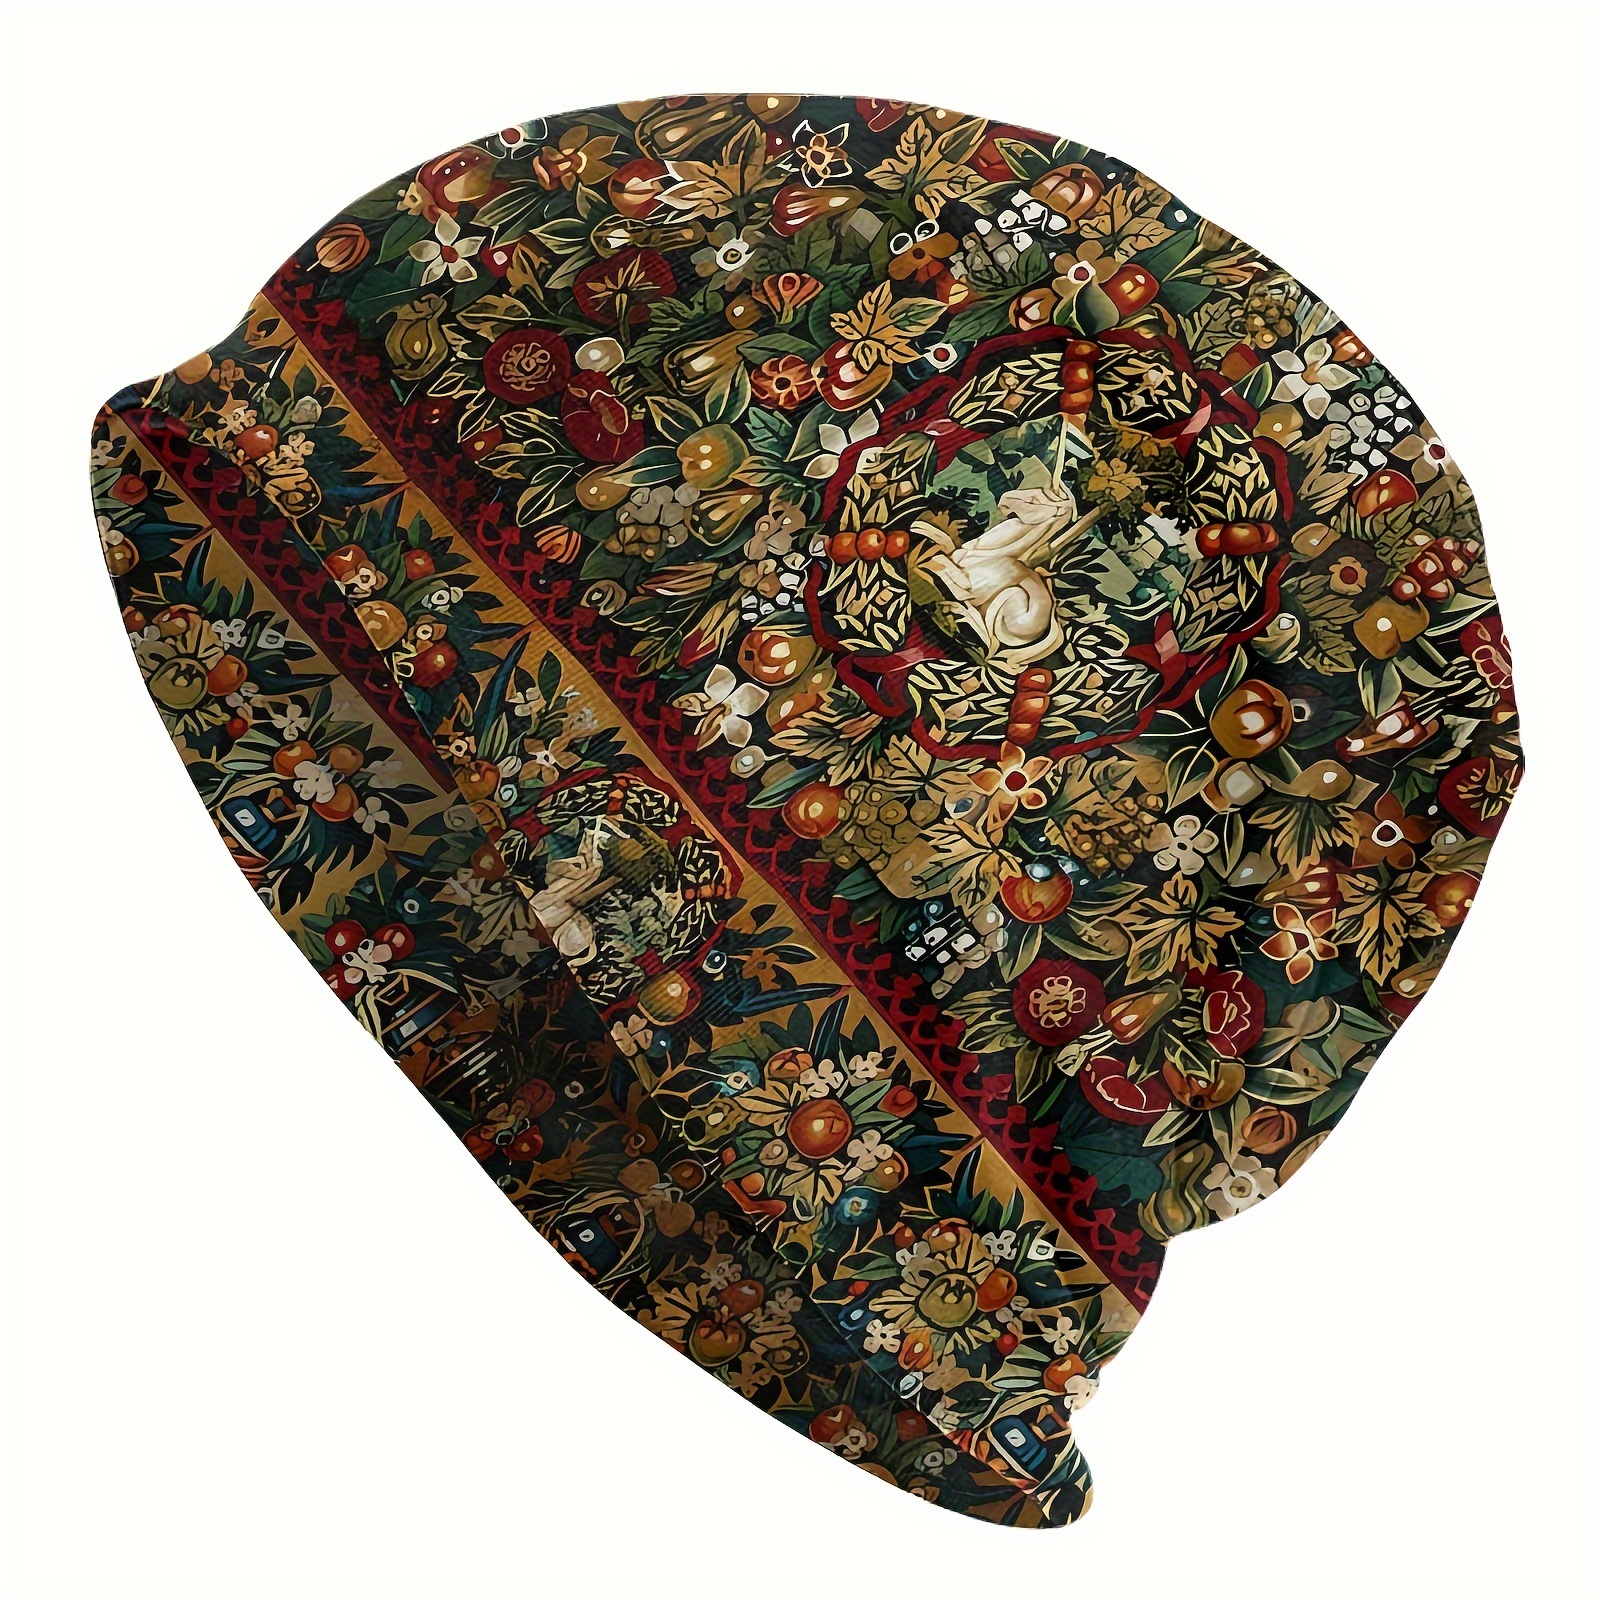 

Medieval Unicorn Floral Tapestry Bonnet For Men And Women - Outdoor Thin Hat, Skullies Beanies Hat- Creative Fabric Hats